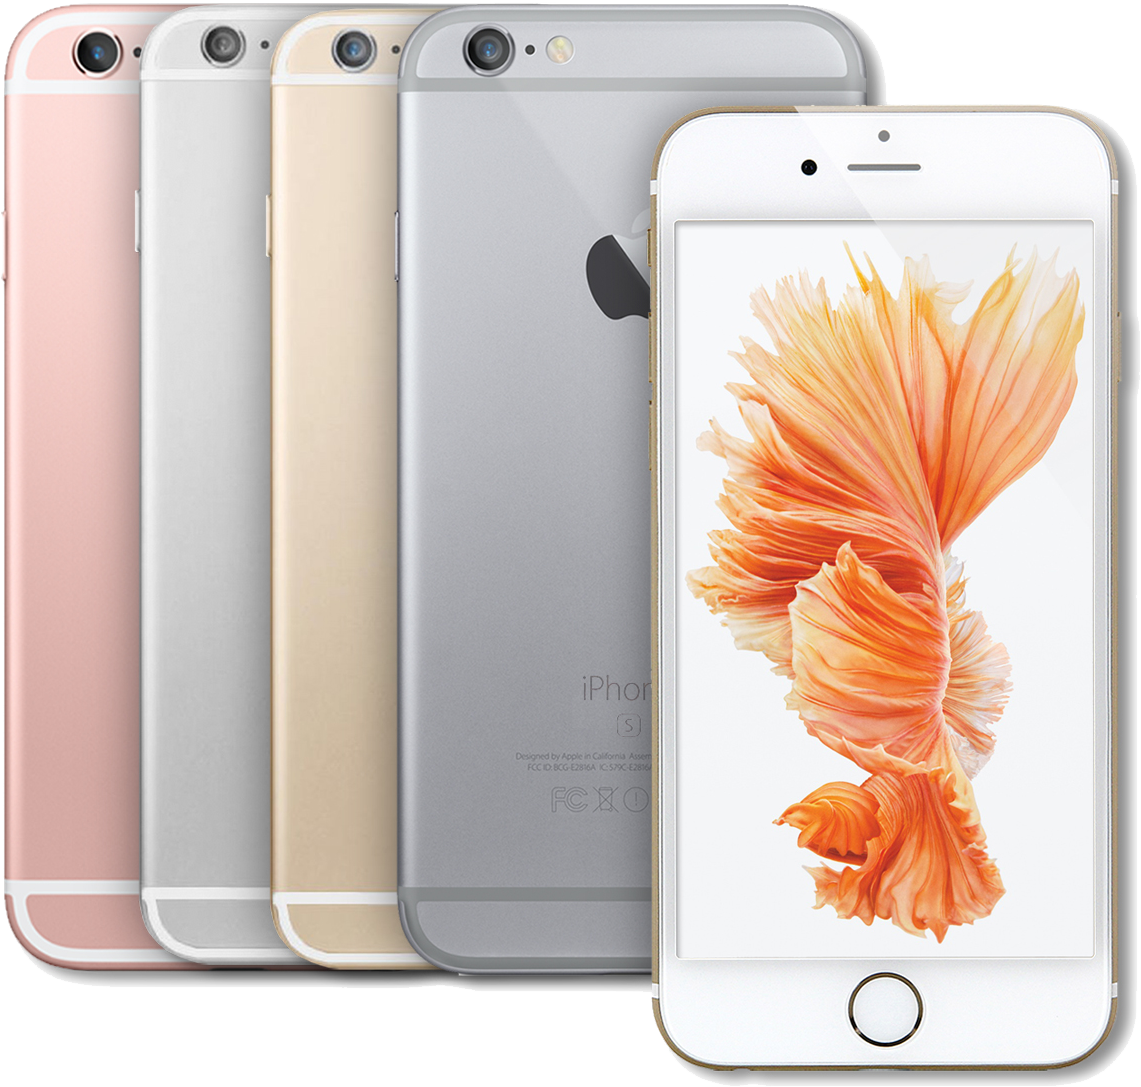 Apple Iphone 6s Plus 16gb 64gb Gsm Unlocked 4g Lte - Rose Gold Iphone 6s (1200x1200), Png Download